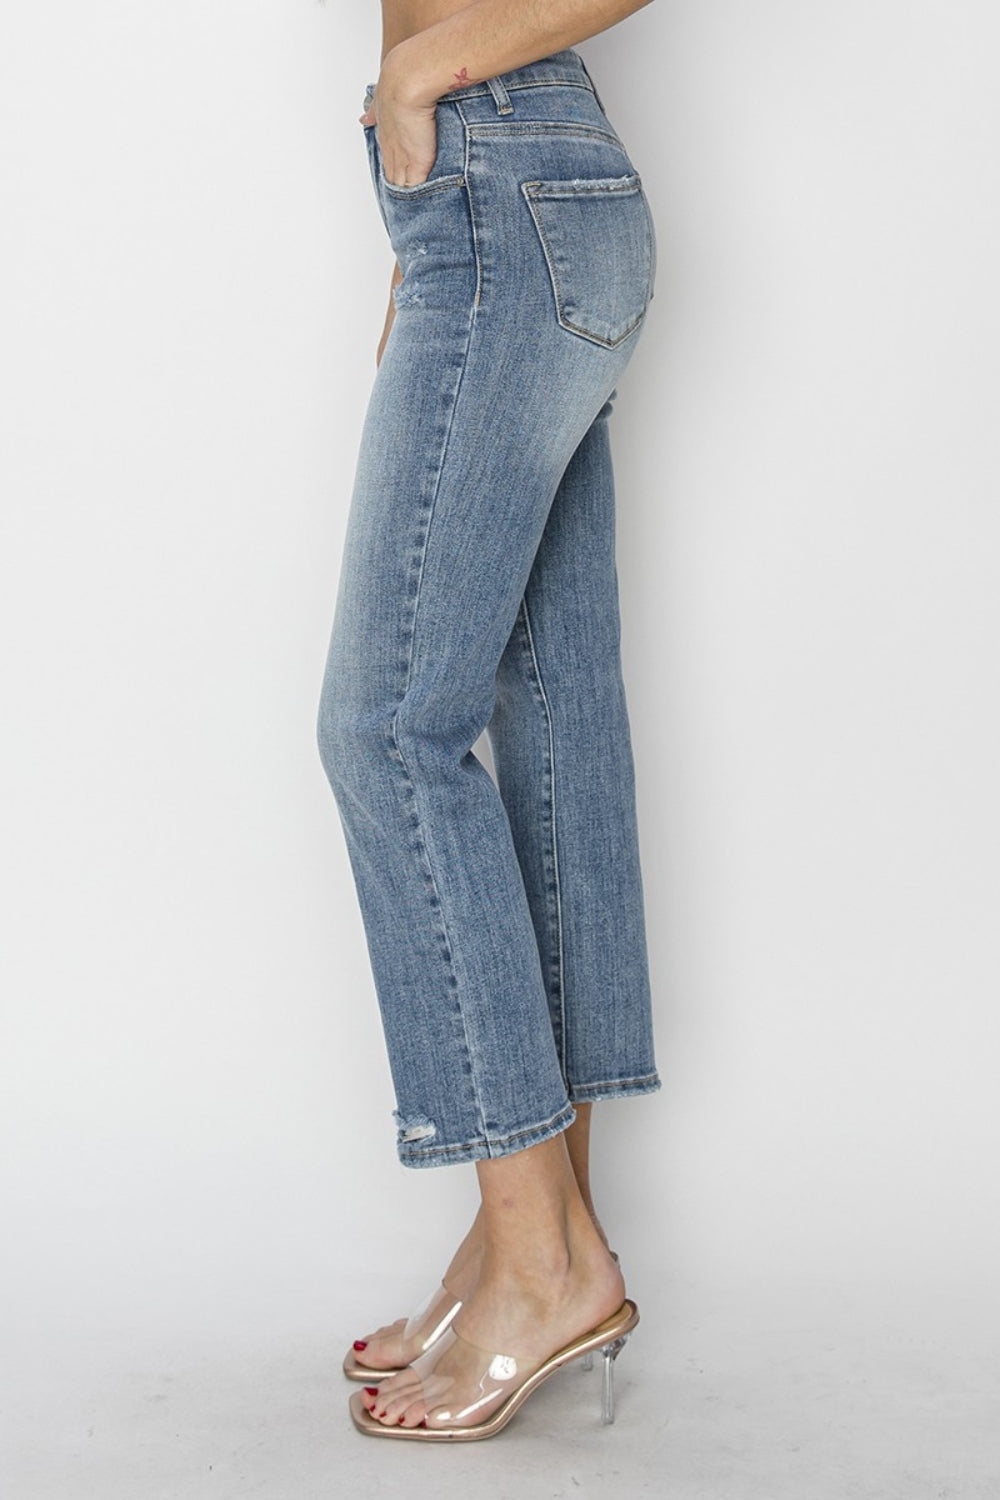 RISEN Fineas High Waist Distressed Cropped Jeans